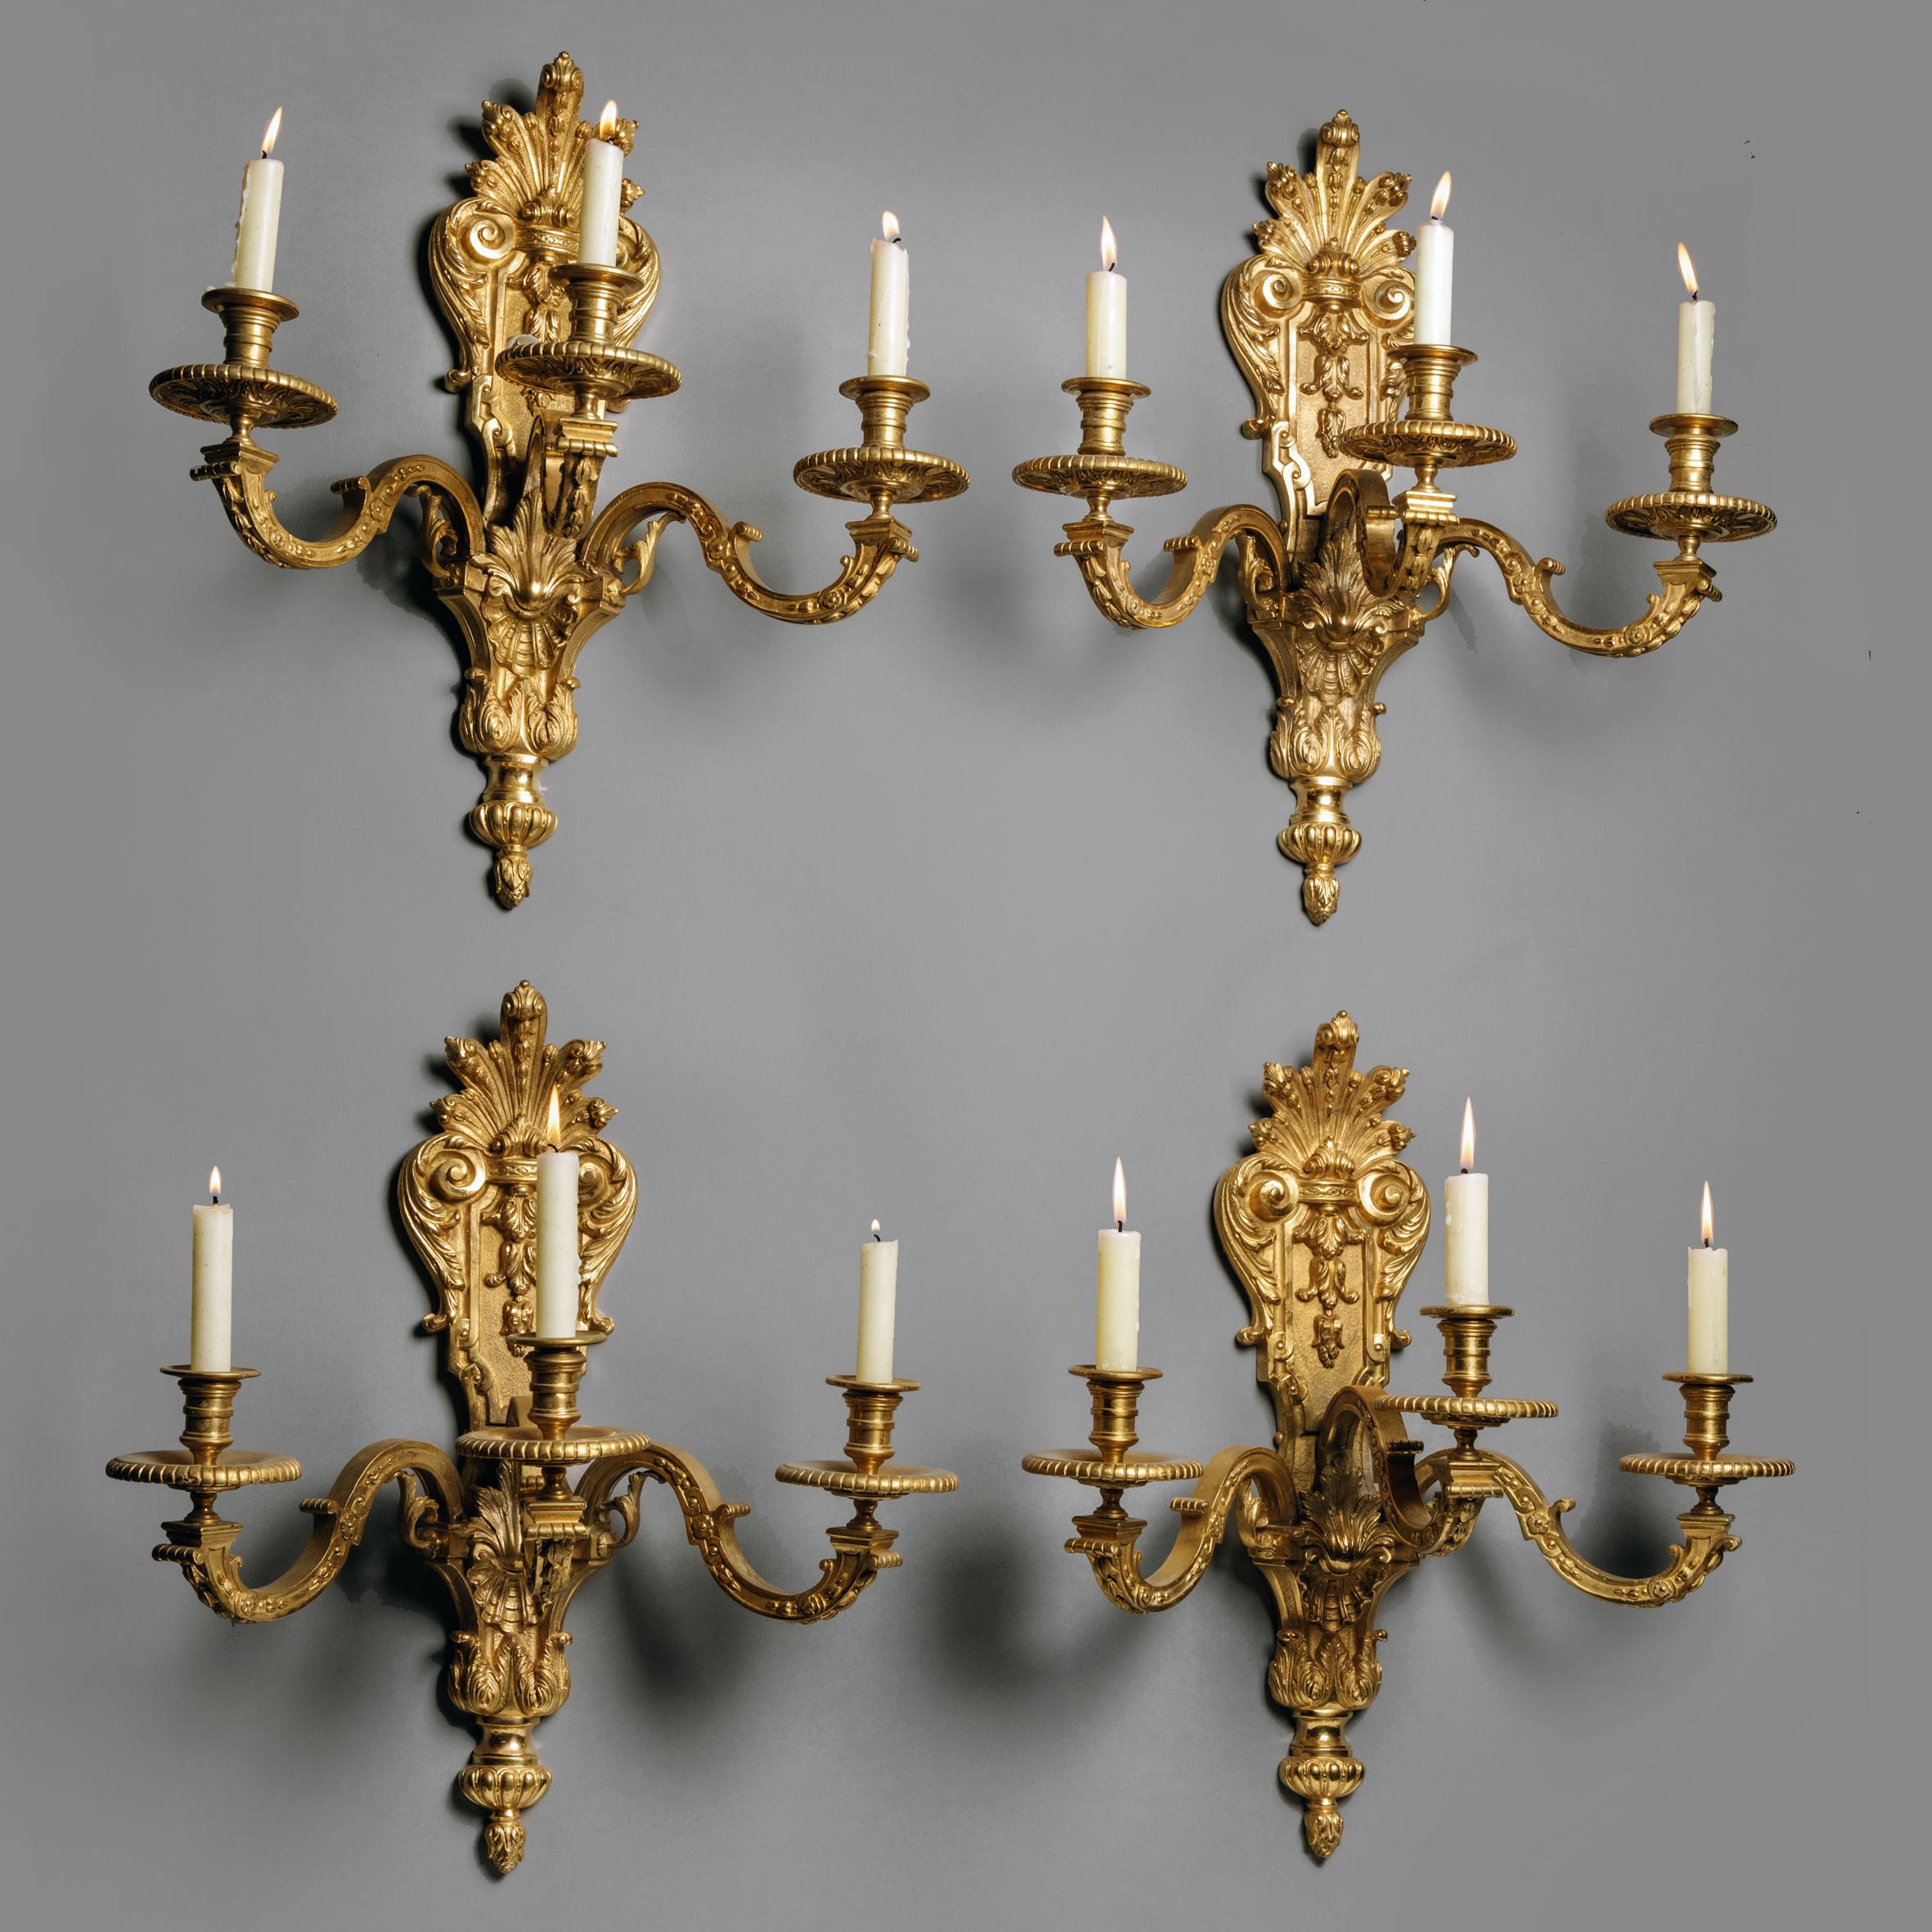 A fine set of four Louis XIV style gilt-bronze wall appliques.

Each applique having a backplate cast with palmettes and fronded acanthus and issuing three scrolling candle arms terminating in gadrooned drip trays and baluster turned